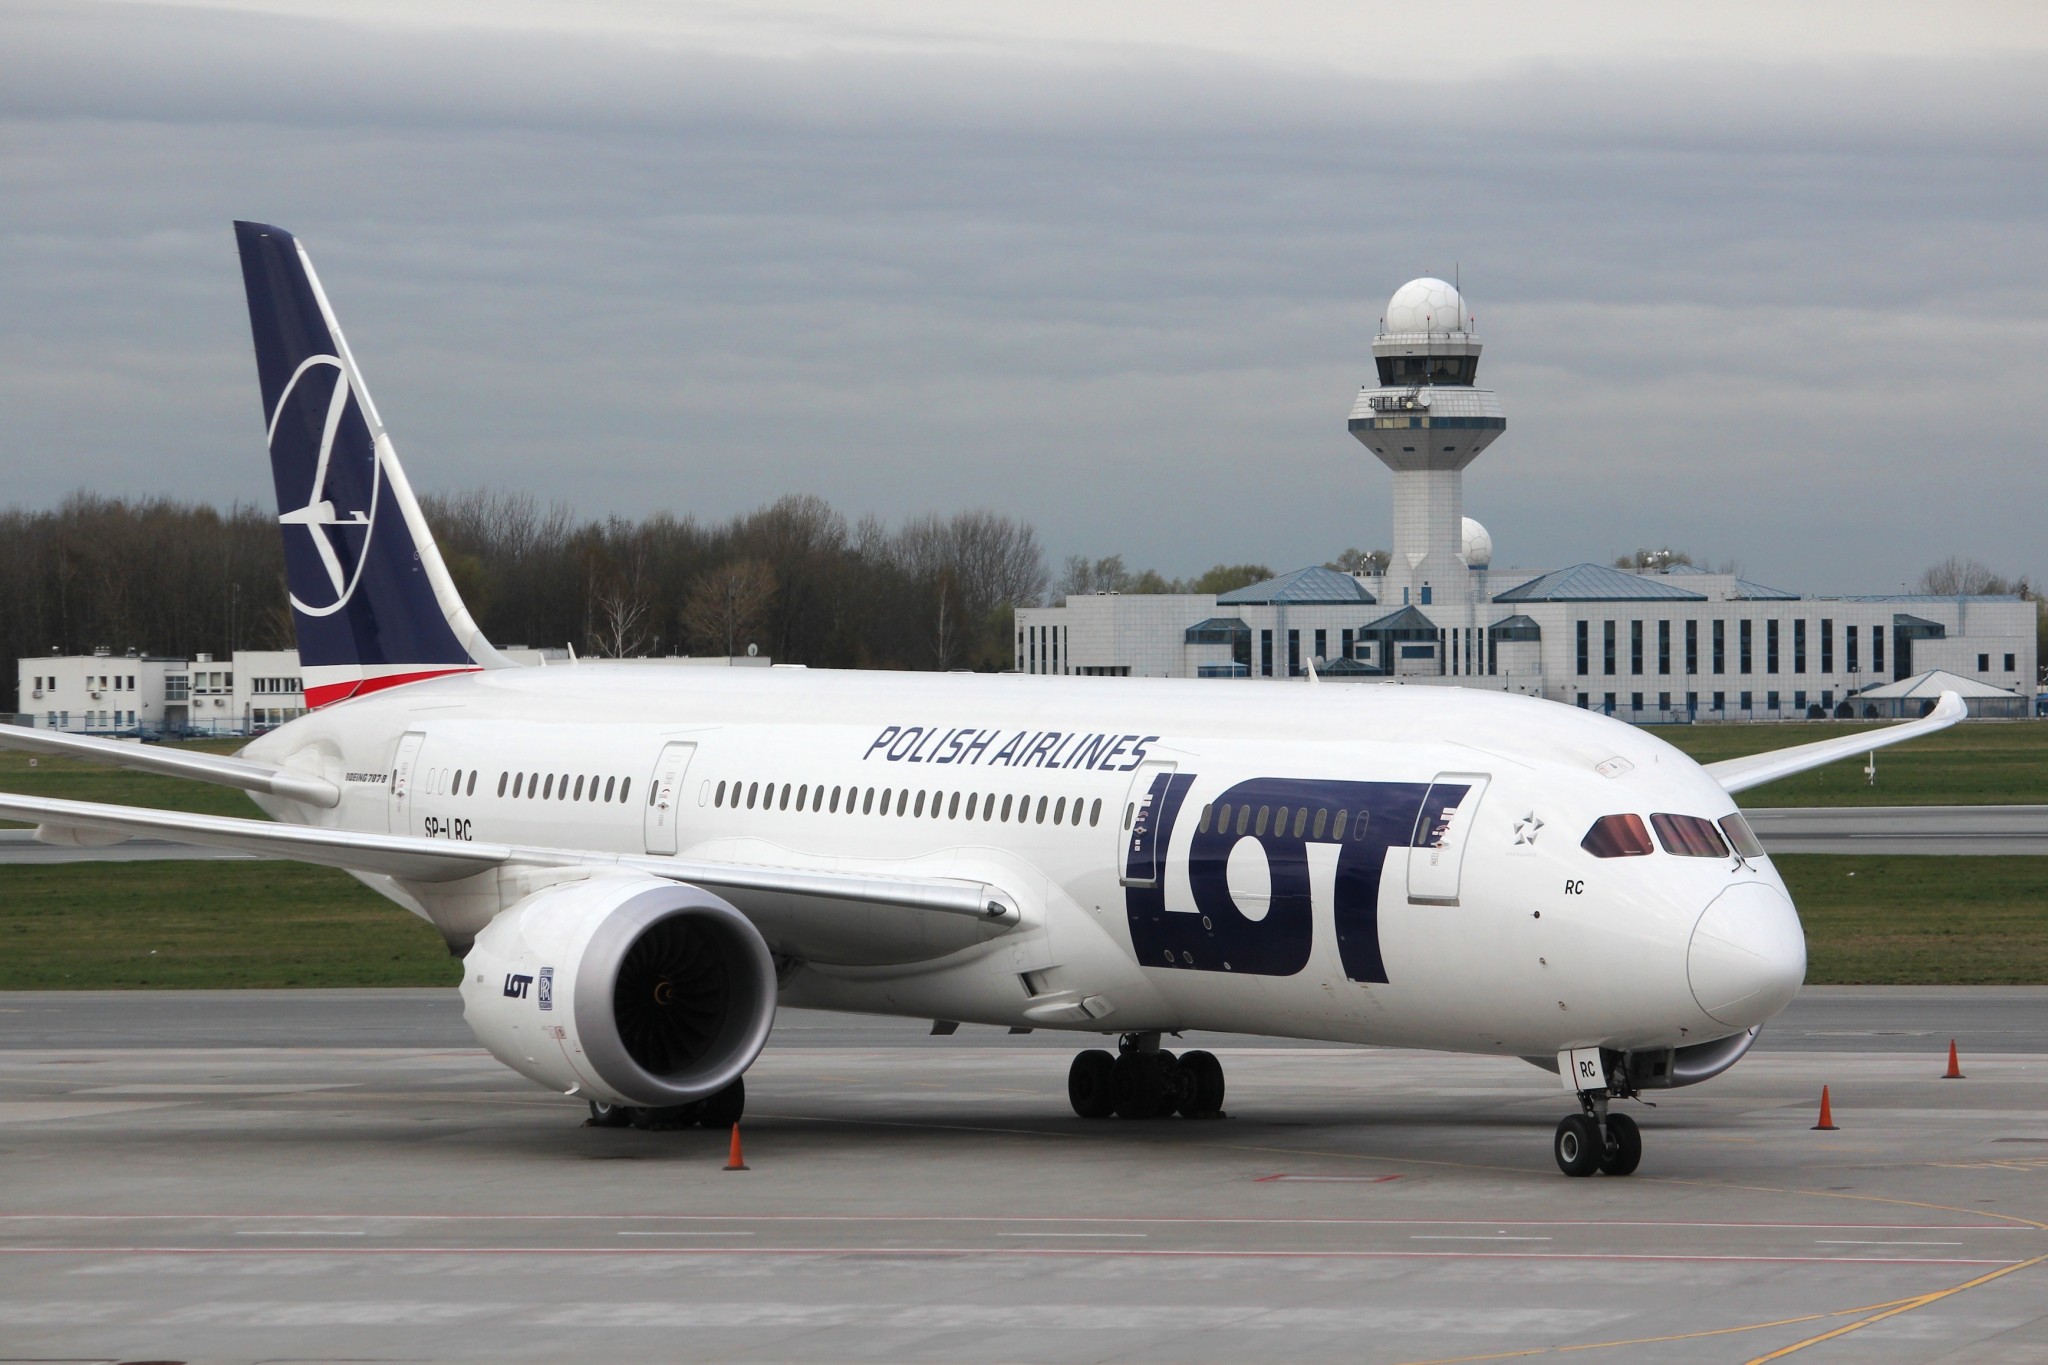 LOT launches direct flight to LAW